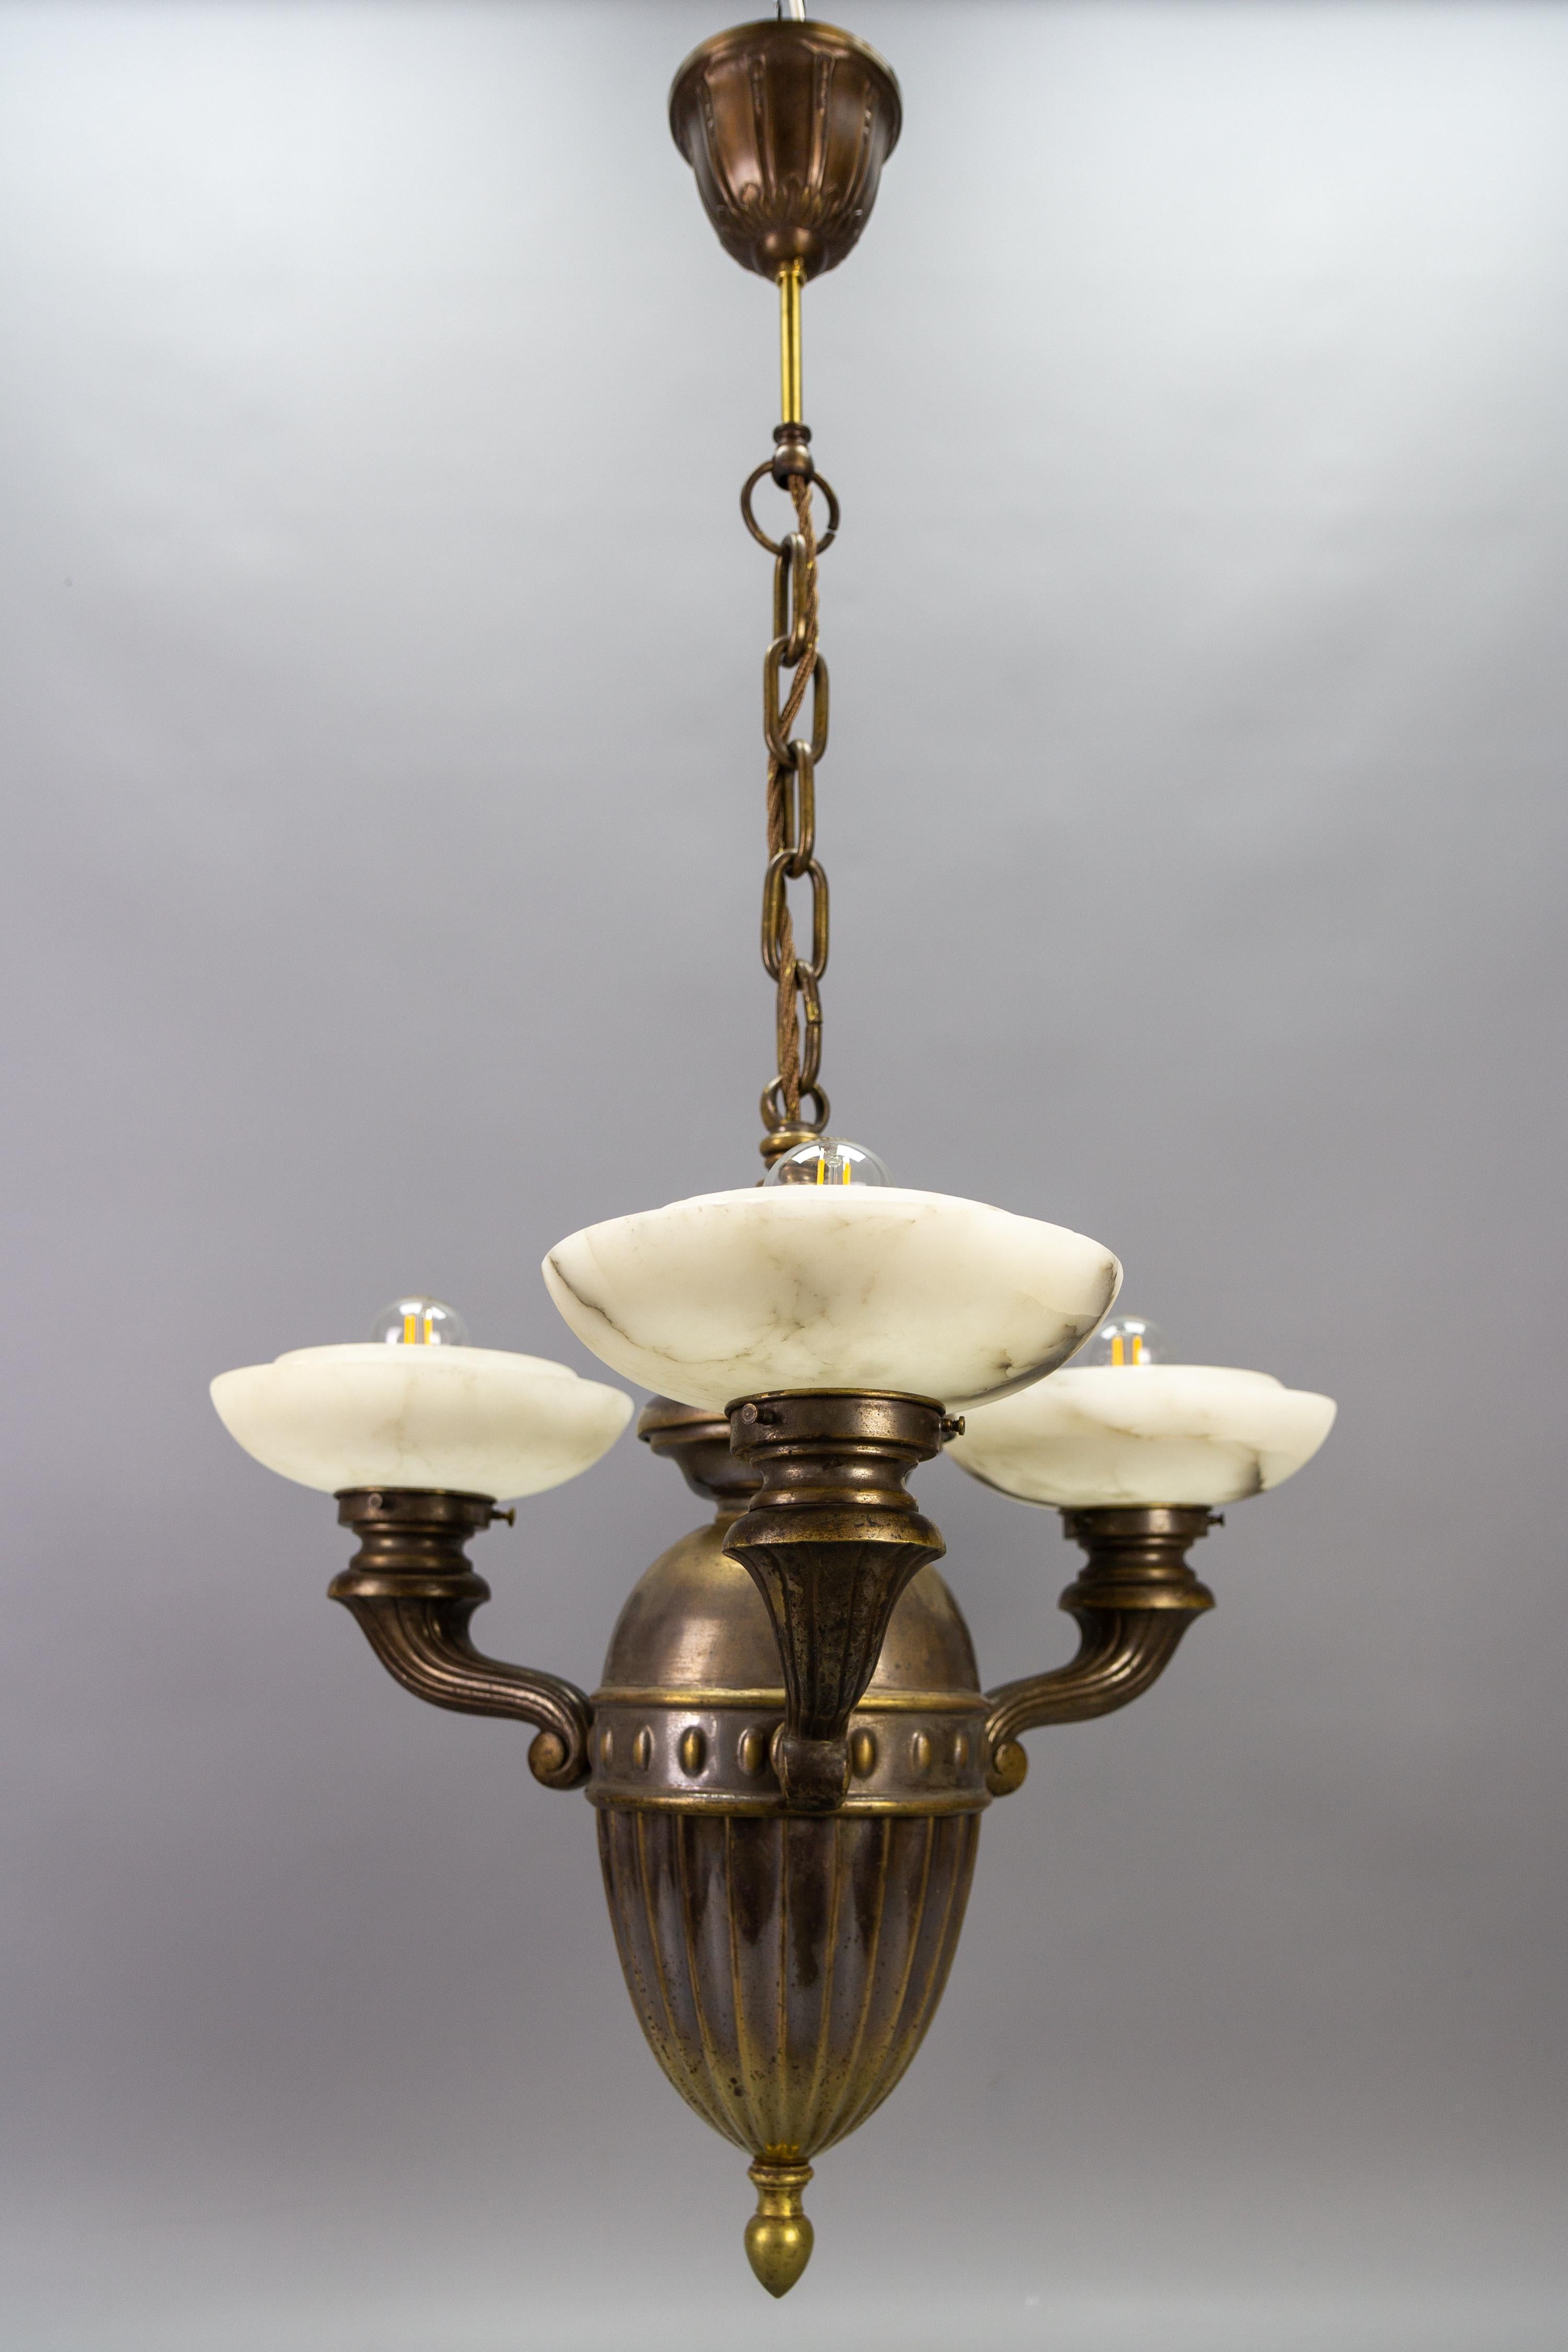 Art Deco alabaster and brass three-light chandelier, 1930s.
This elegant chandelier from the 1930s features a dark brass oviform body with three arms each with a beautiful white and dark veined alabaster shade and a socket for E27 (E26) size light